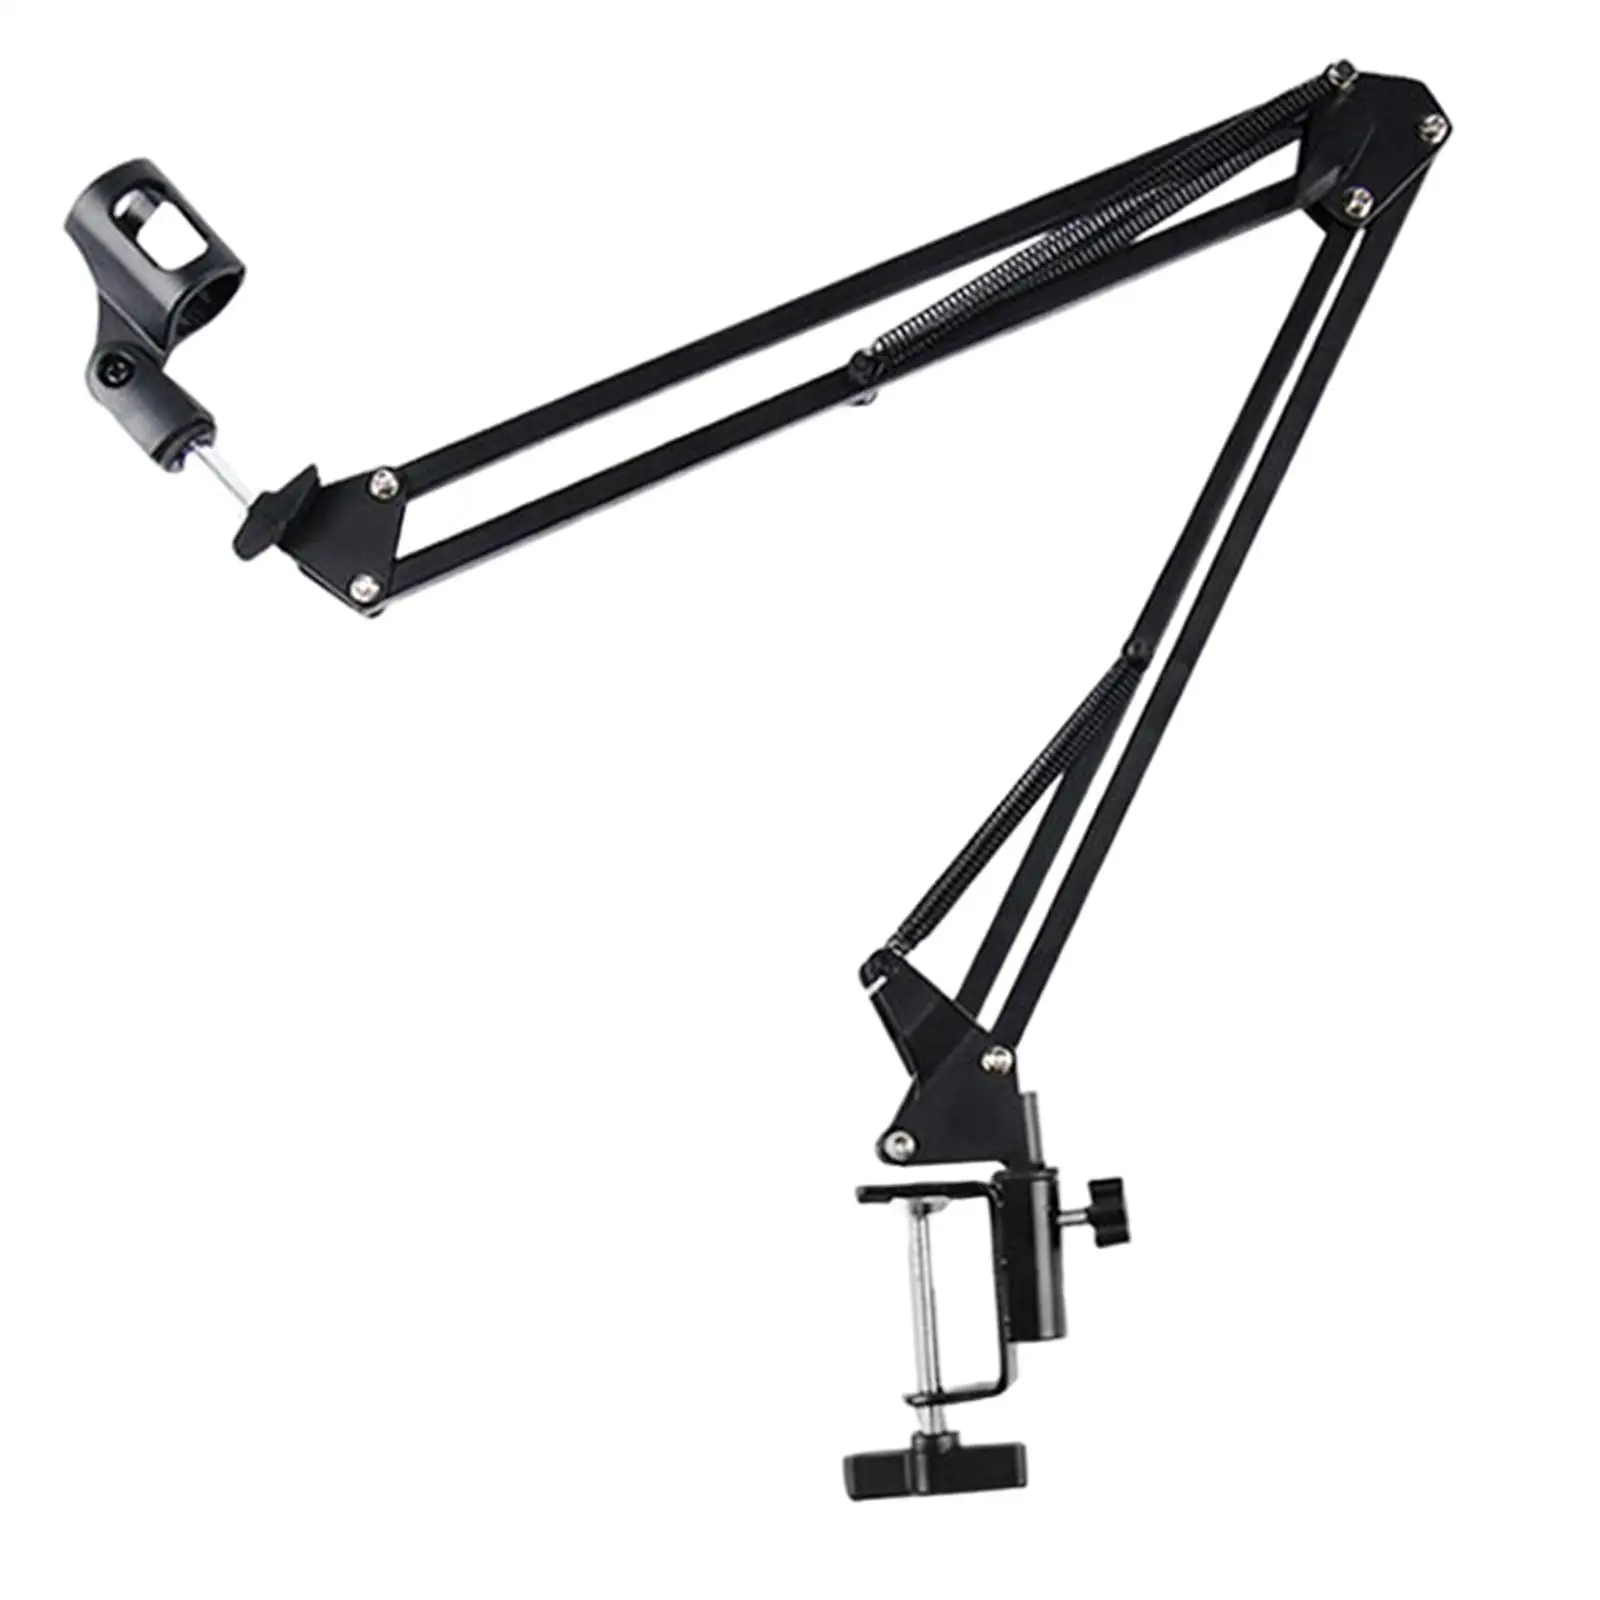 Foldable Mic Stand Sturdy Steel with Desk Clamp Universal Desktop Holder Adjustable Mic  Mount for Podcasting Studio